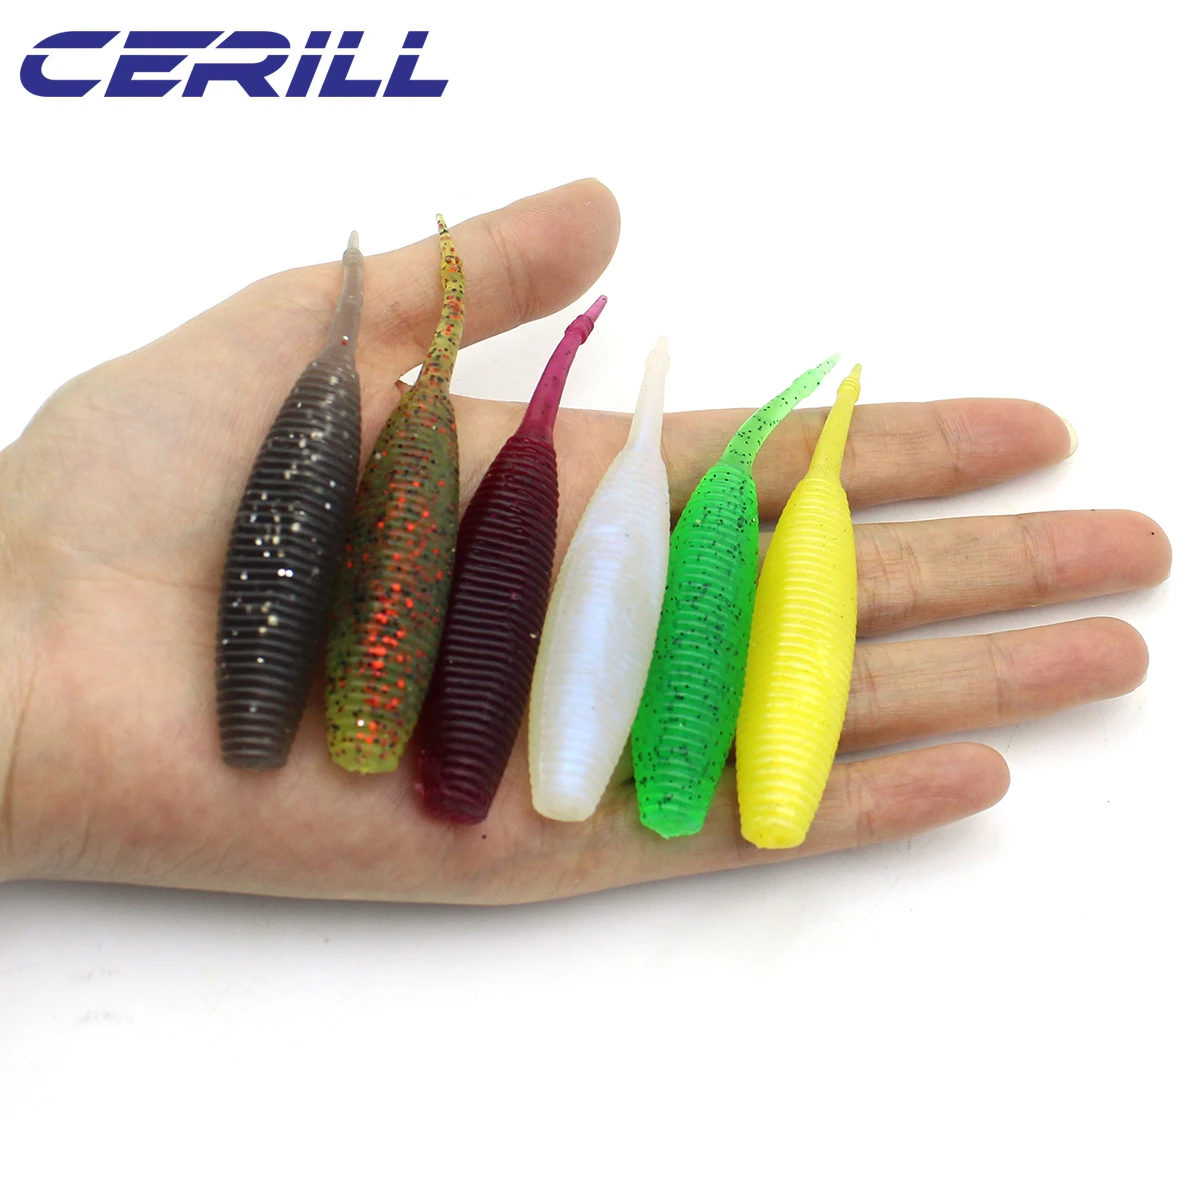 Lot 10 Cerill 90 mm 5 g Needle Tail Grub Floating Soft Fishing Lure Bait  Jigging Wobblers Silicone Artificial Carp Bass Swimbait